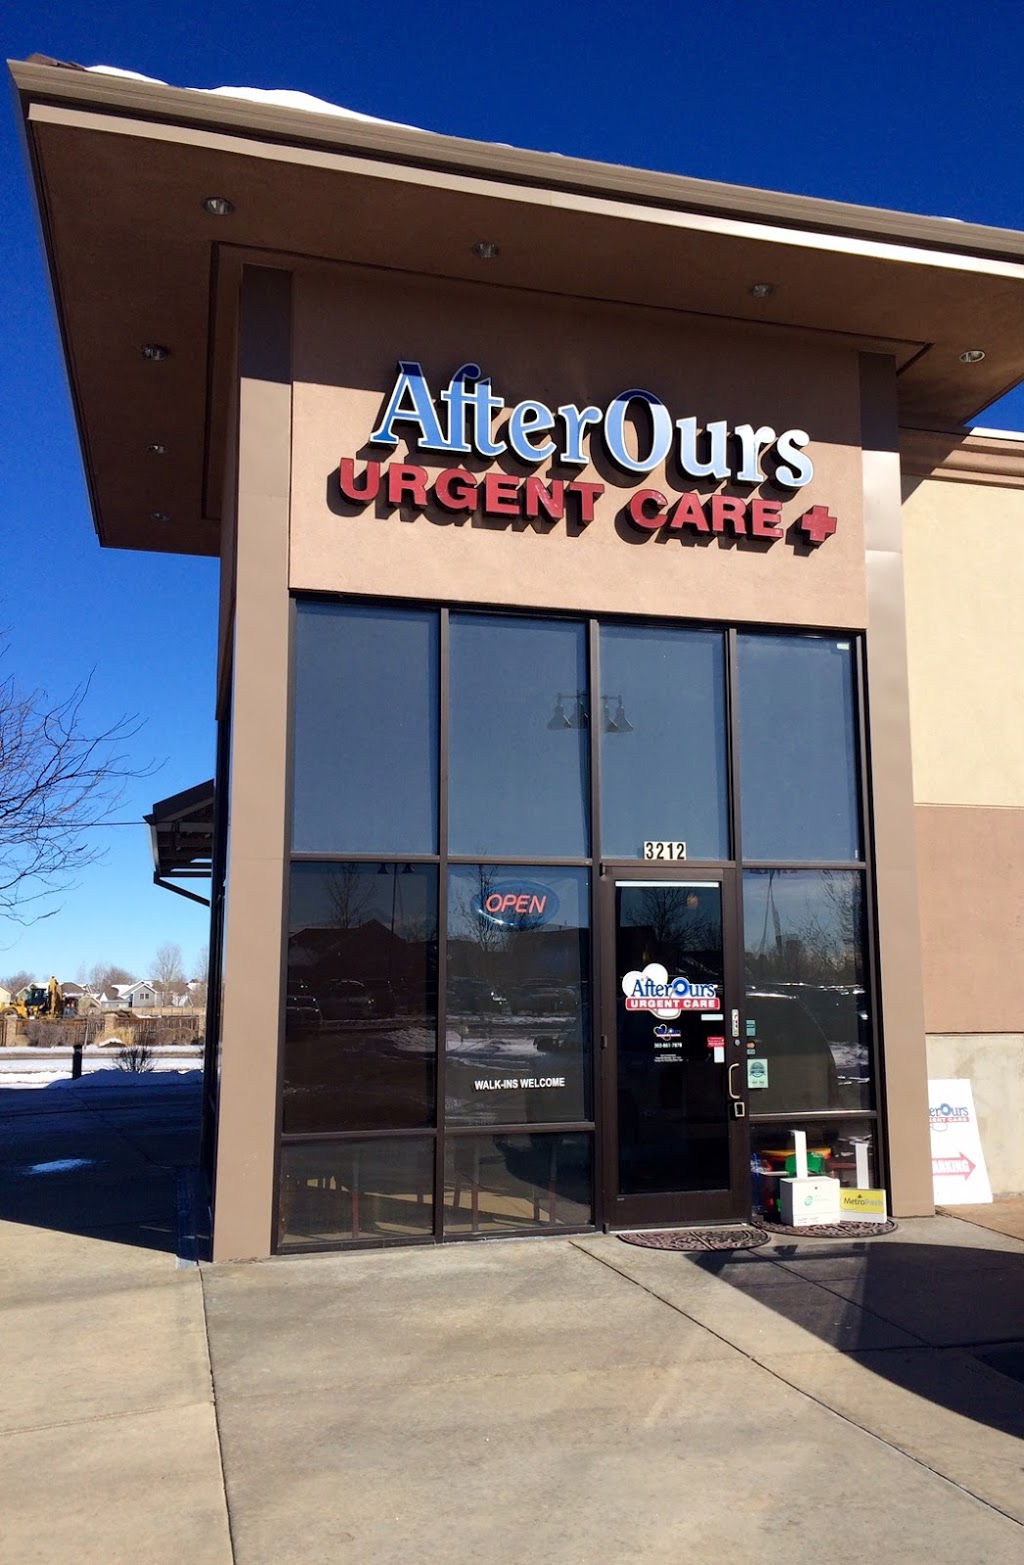 AfterOurs Urgent Care | 3212 E 104th Ave, Thornton, CO 80223 | Phone: (303) 861-7878